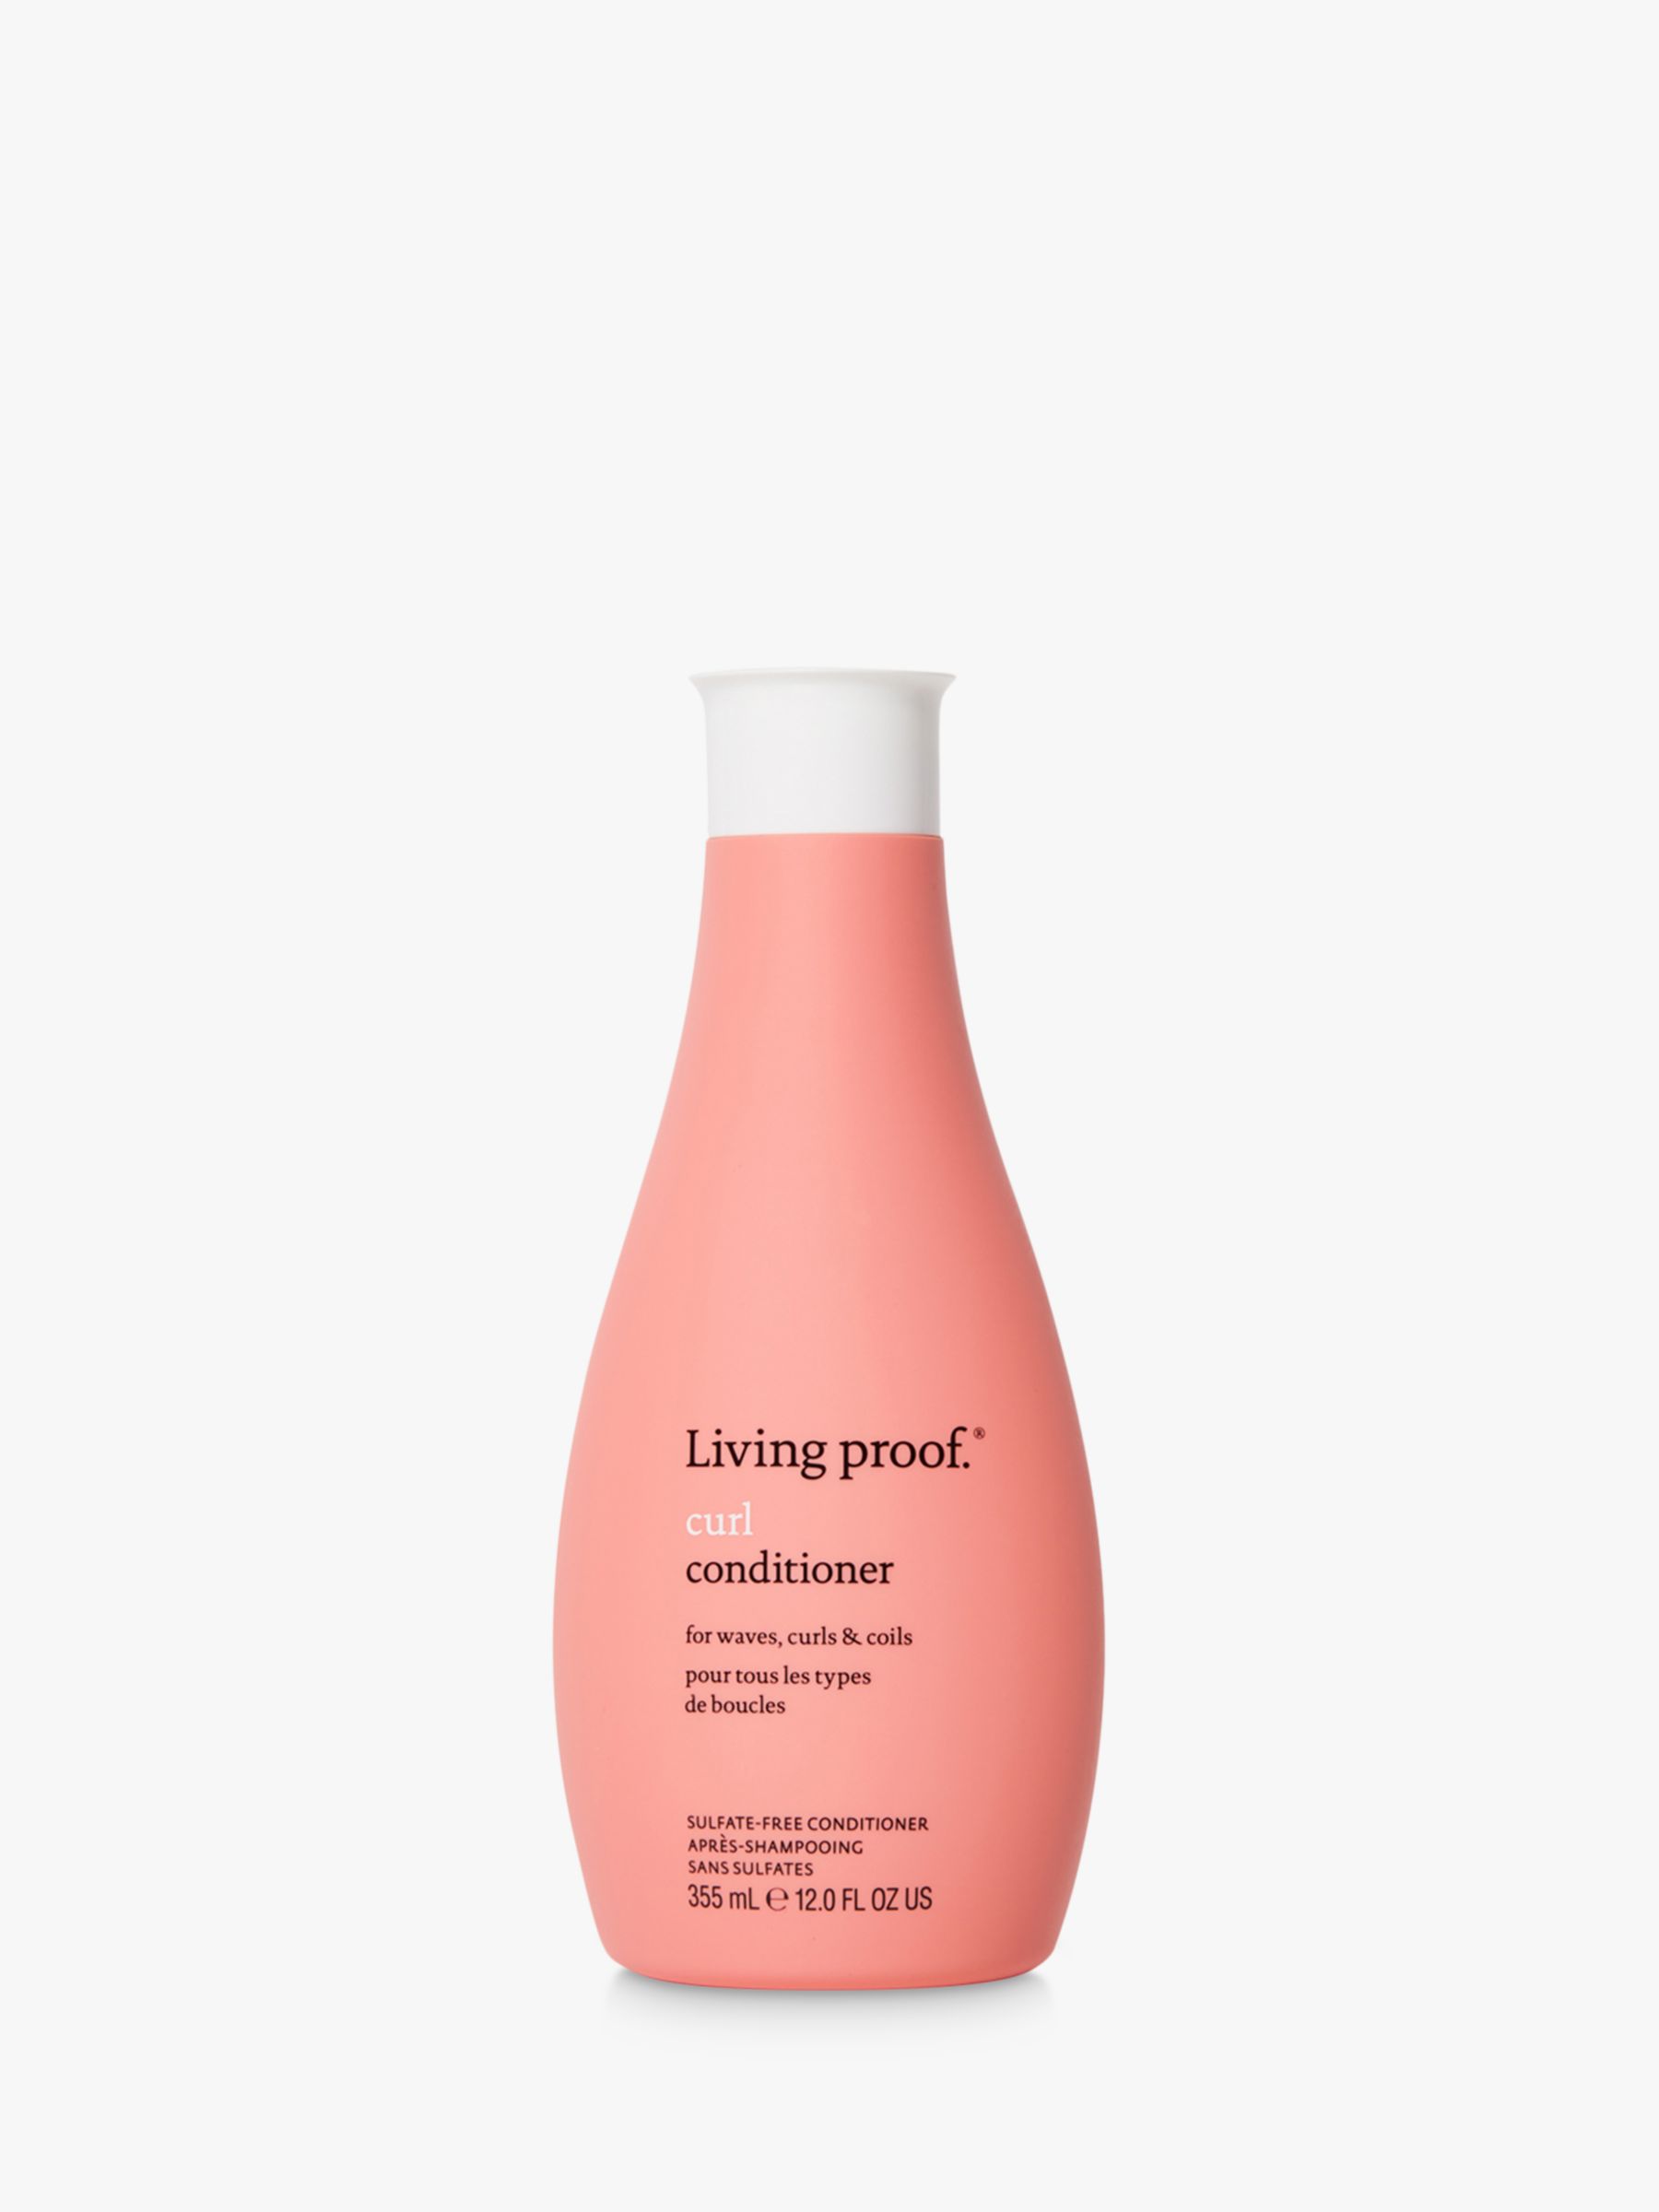 Living Proof Curl Conditioner, 355ml 1